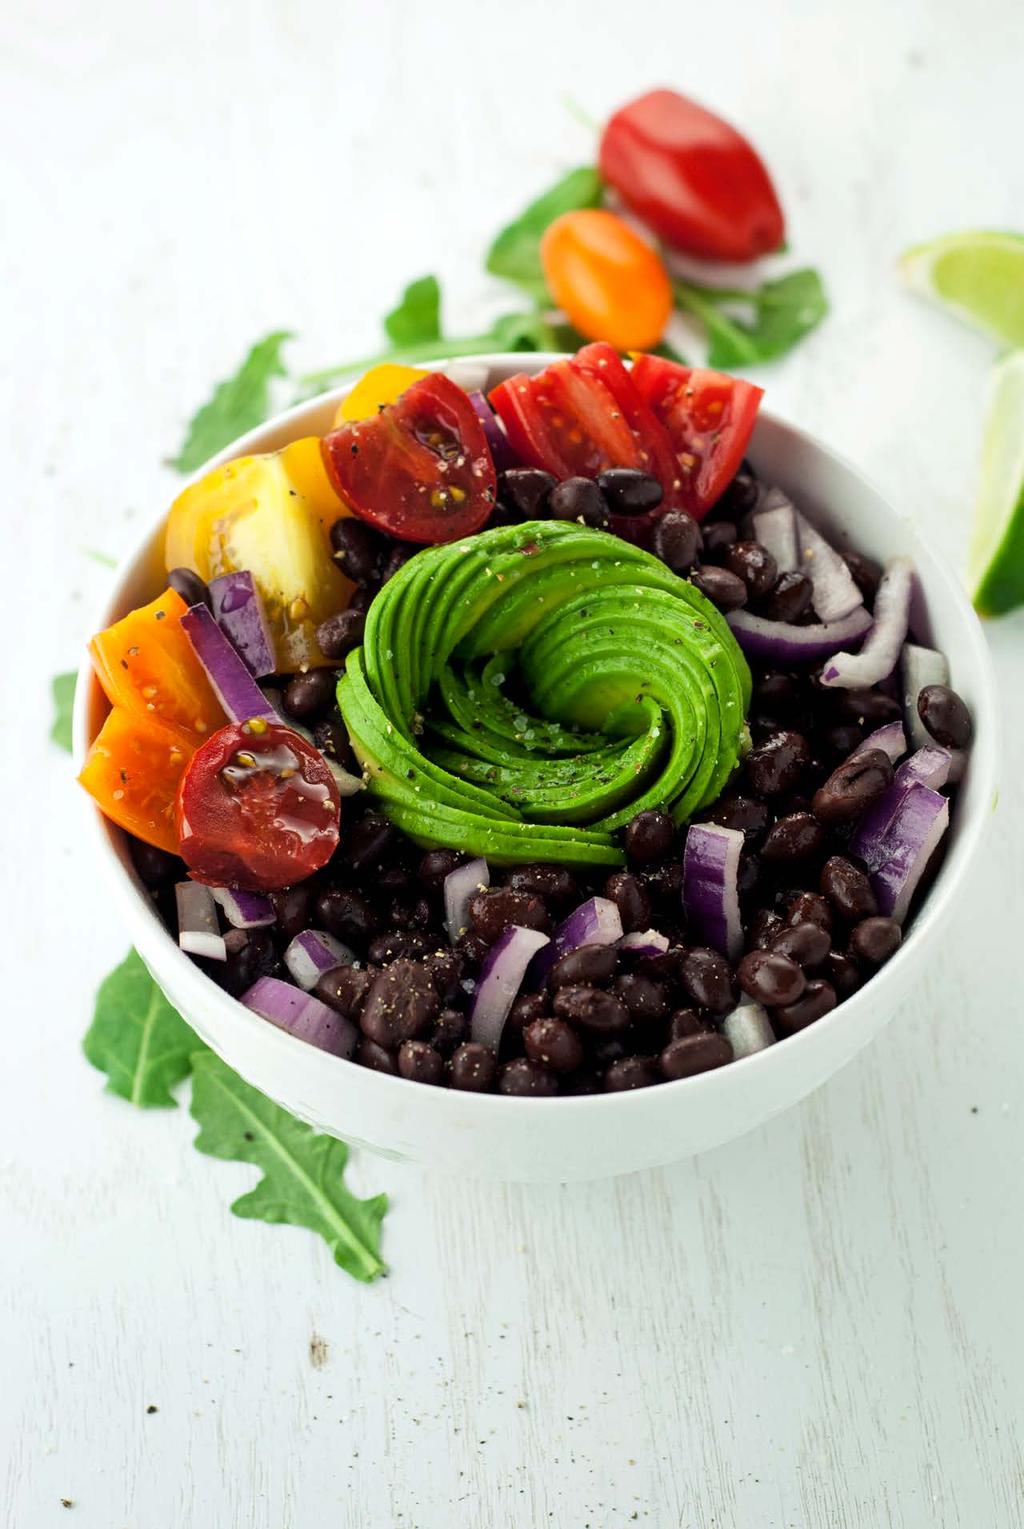 19. Avocado Lime Black Bean Bowl Packed with protein and ready in minutes, this flavorful bowl features the bright, vibrant flavors of classic Mexican cuisine!